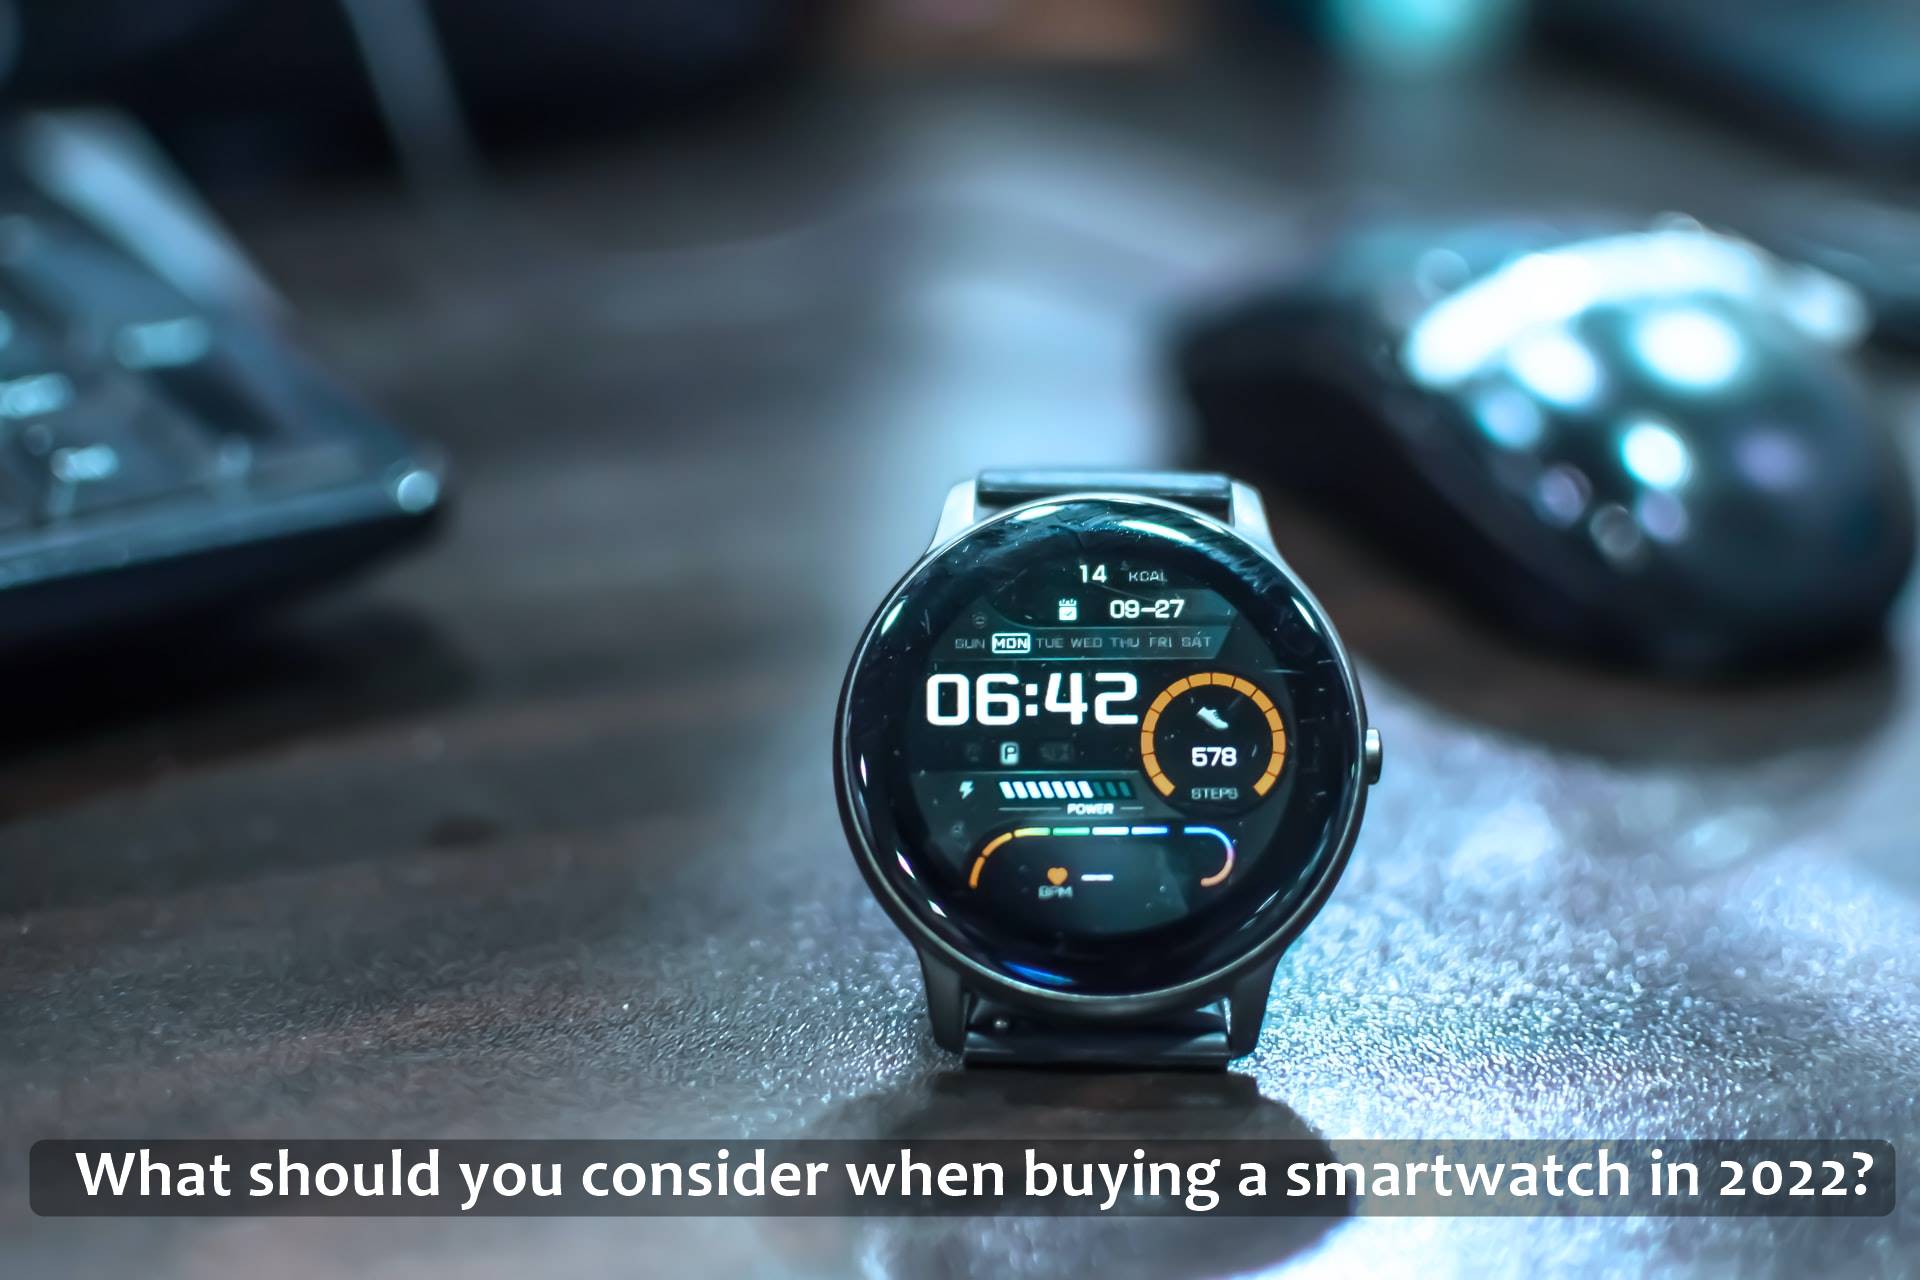 What should you consider when buying a smartwatch in 2022?